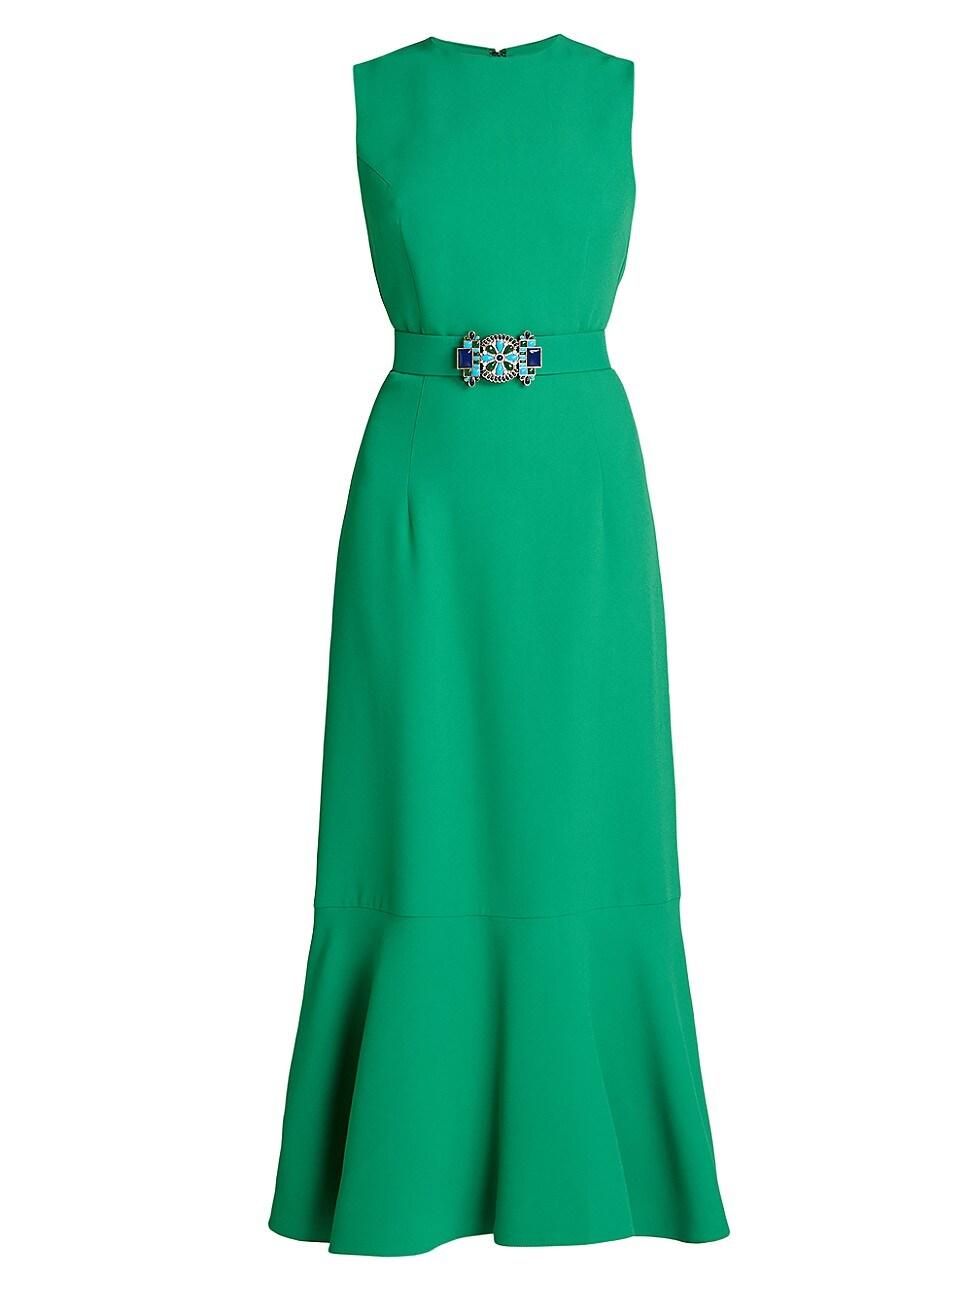 Andrew Gn Crepe Belted Midi-dress in Green | Lyst